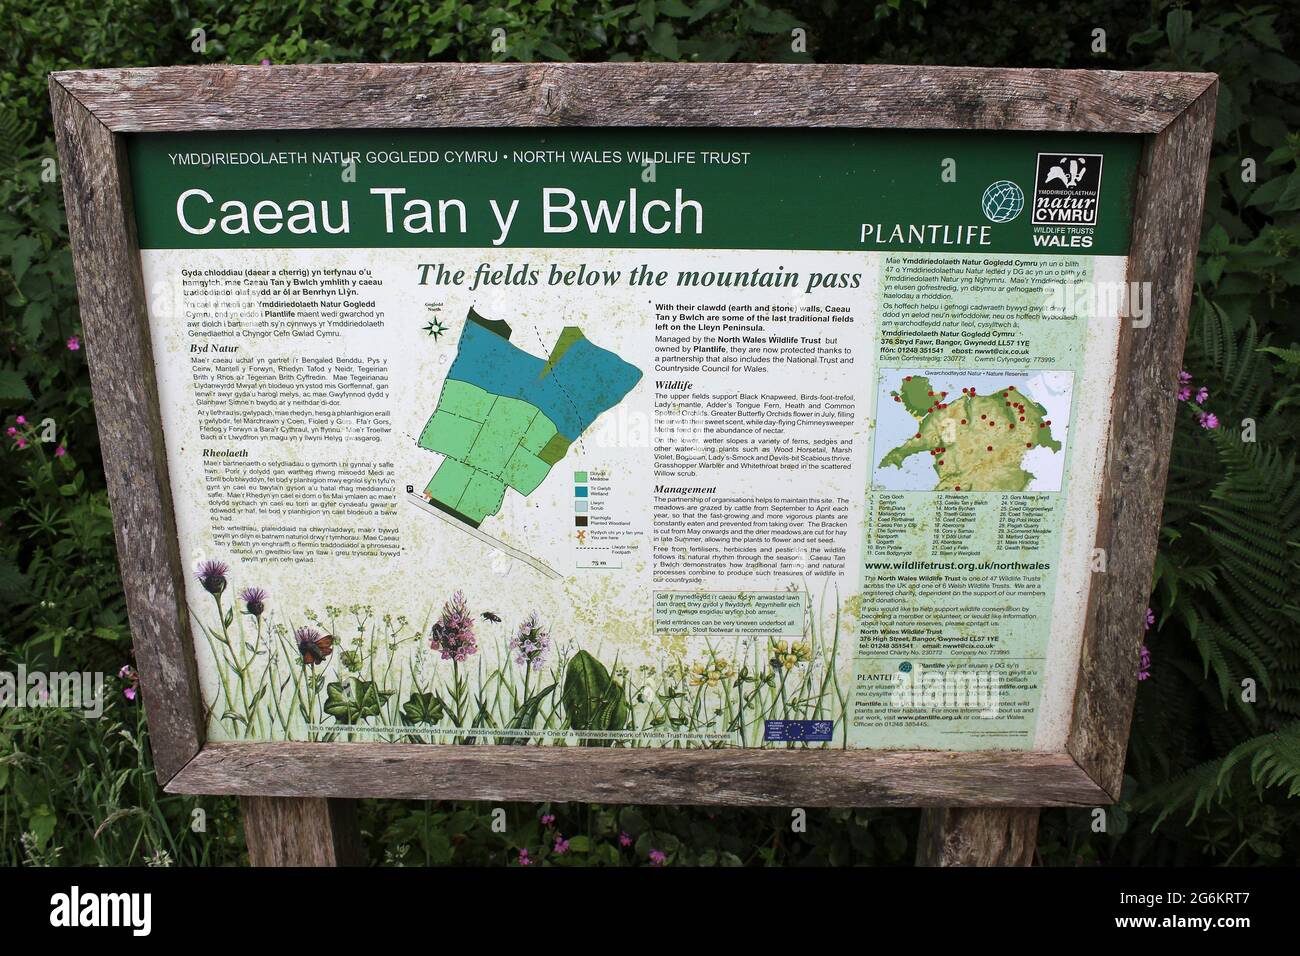 Caeau Tan Y Bwlch Nature Reserve Sign, North Wales Wildlife Trust & Plantlife, Llŷn Peninsula, Wales Stock Photo